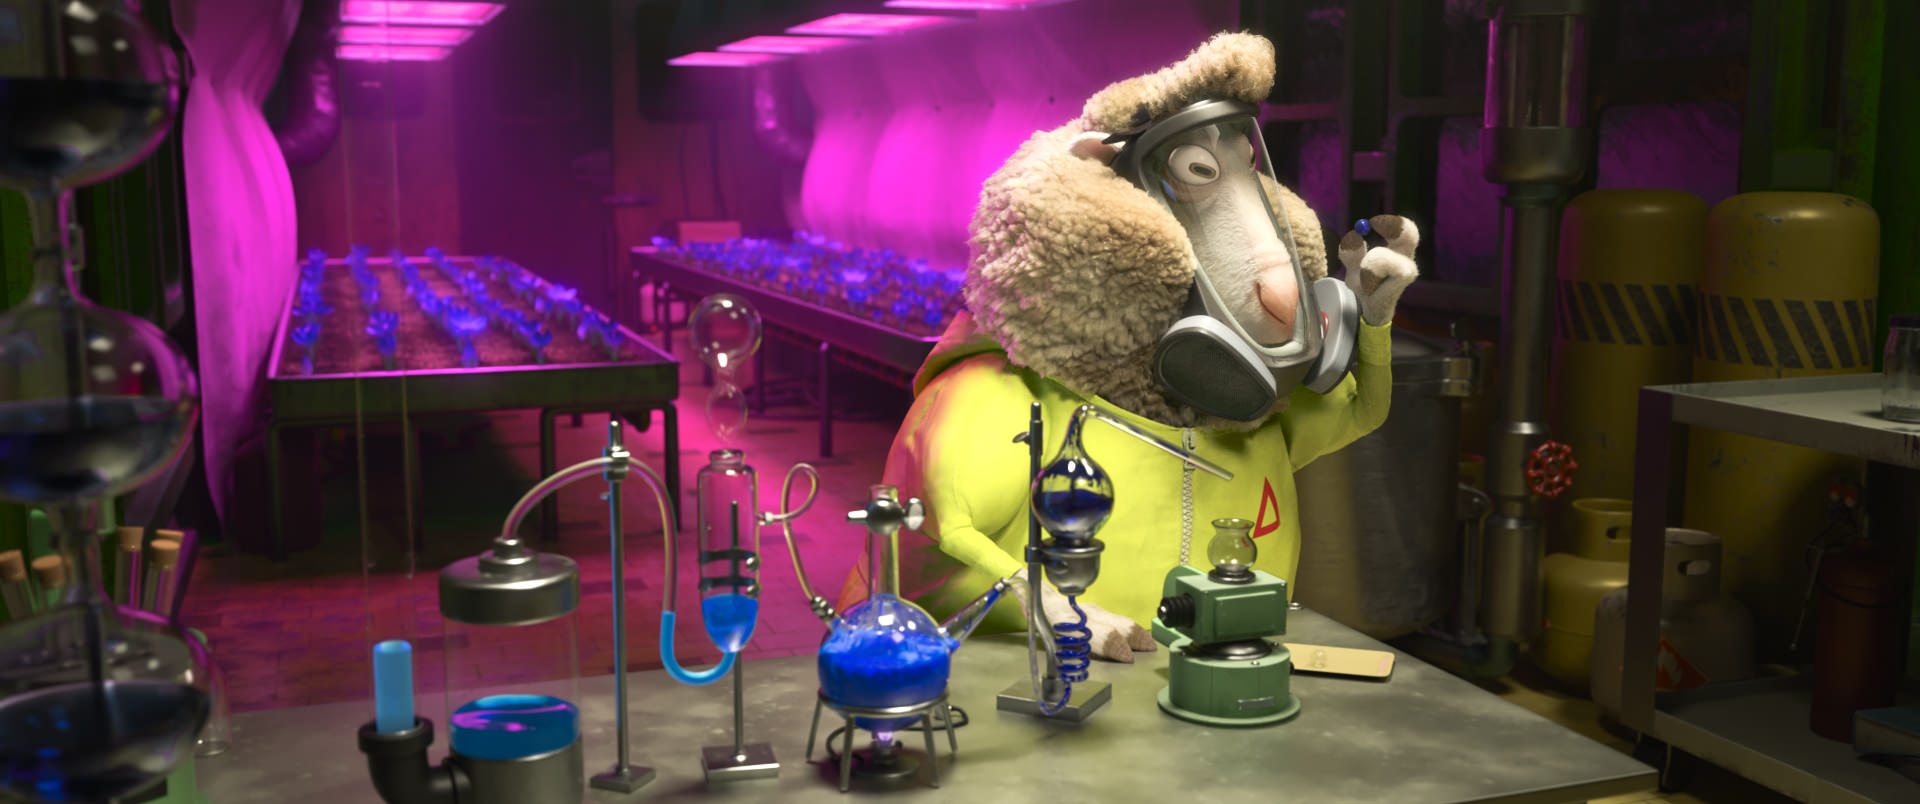 ZOOTOPIA – Easter Eggs: Breaking Bad Reference. ©2016 Disney. All Rights Reserved.